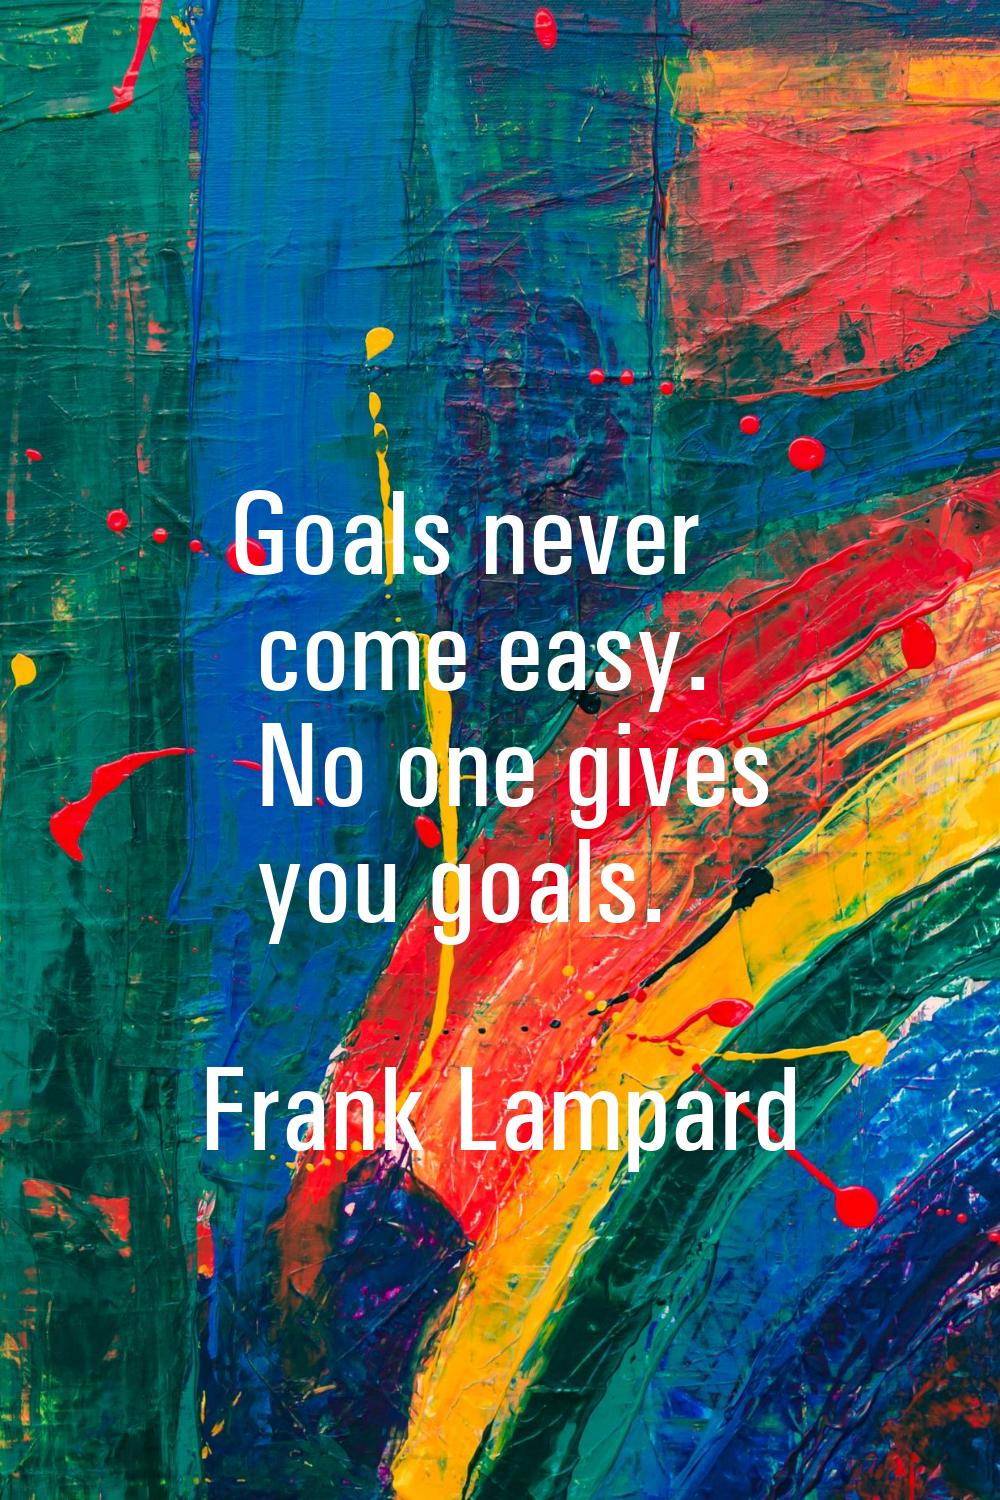 Goals never come easy. No one gives you goals.